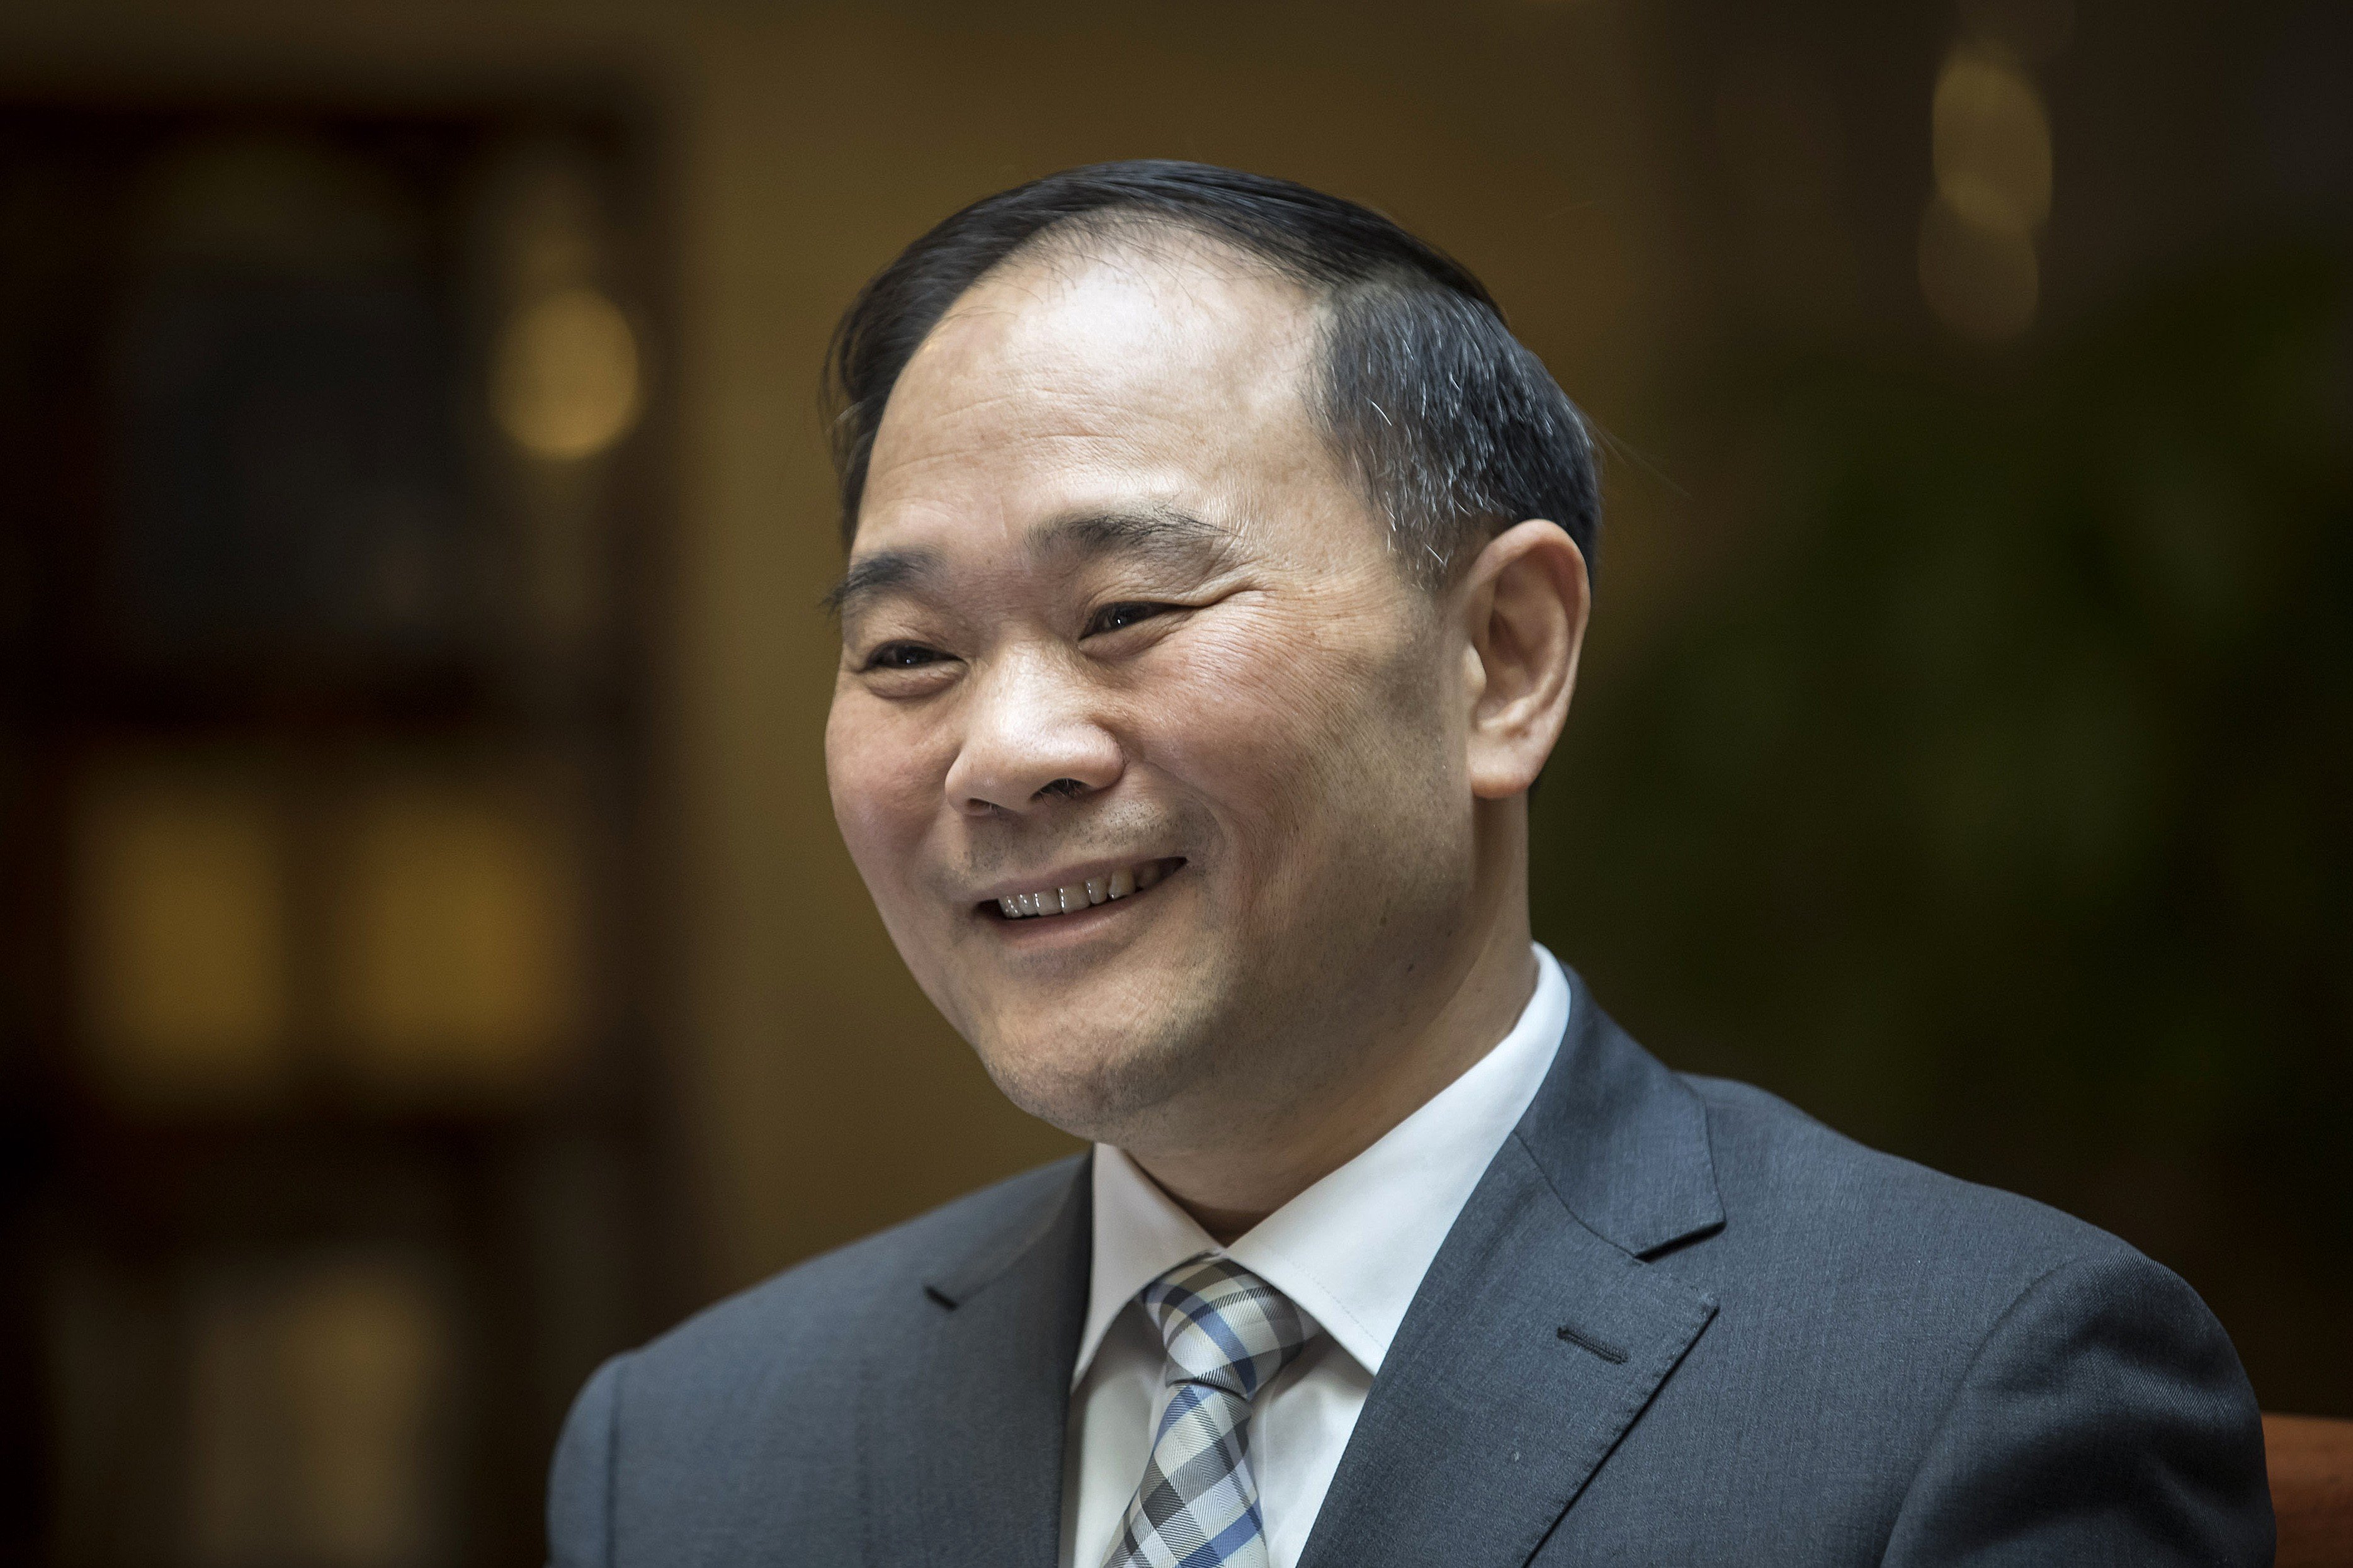 Geely founder Li Shufu’s track record of making deals succeed puts Geely in the driver’s seat in Asia as carmakers seek alliances. Photo: Bloomberg